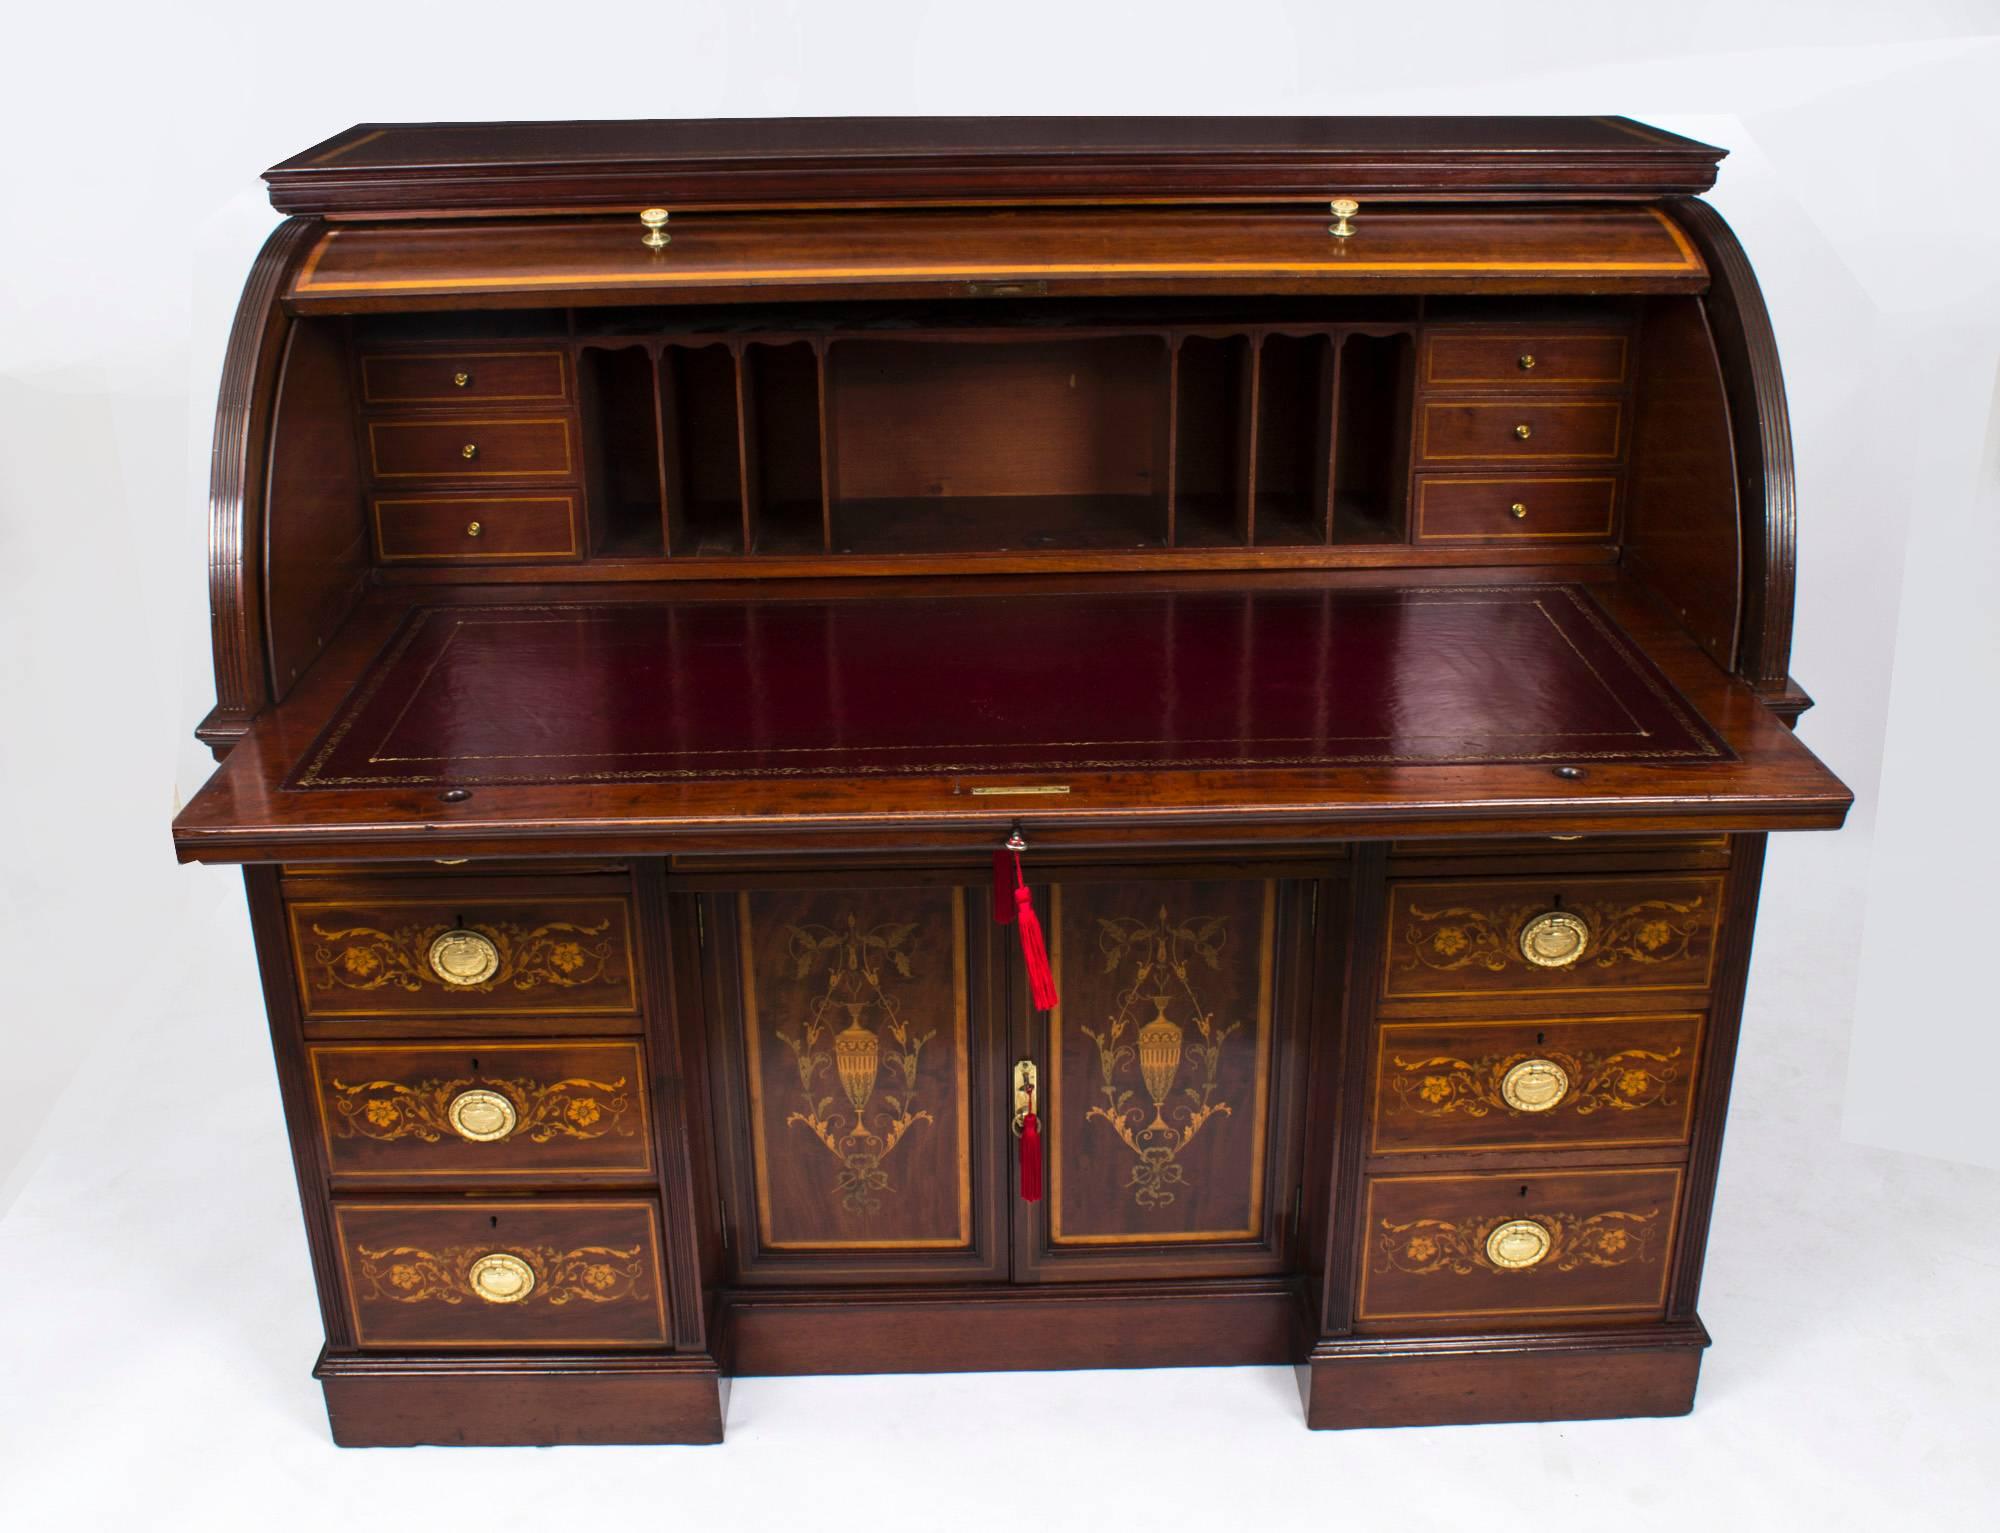 Here we have a very large and impressive late Victorian cylinder bureau made by the well-known and much sought after Victorian cabinet maker and retailer Edwards & Roberts of Wardour Street, London.

Our antique furniture experts have dated this